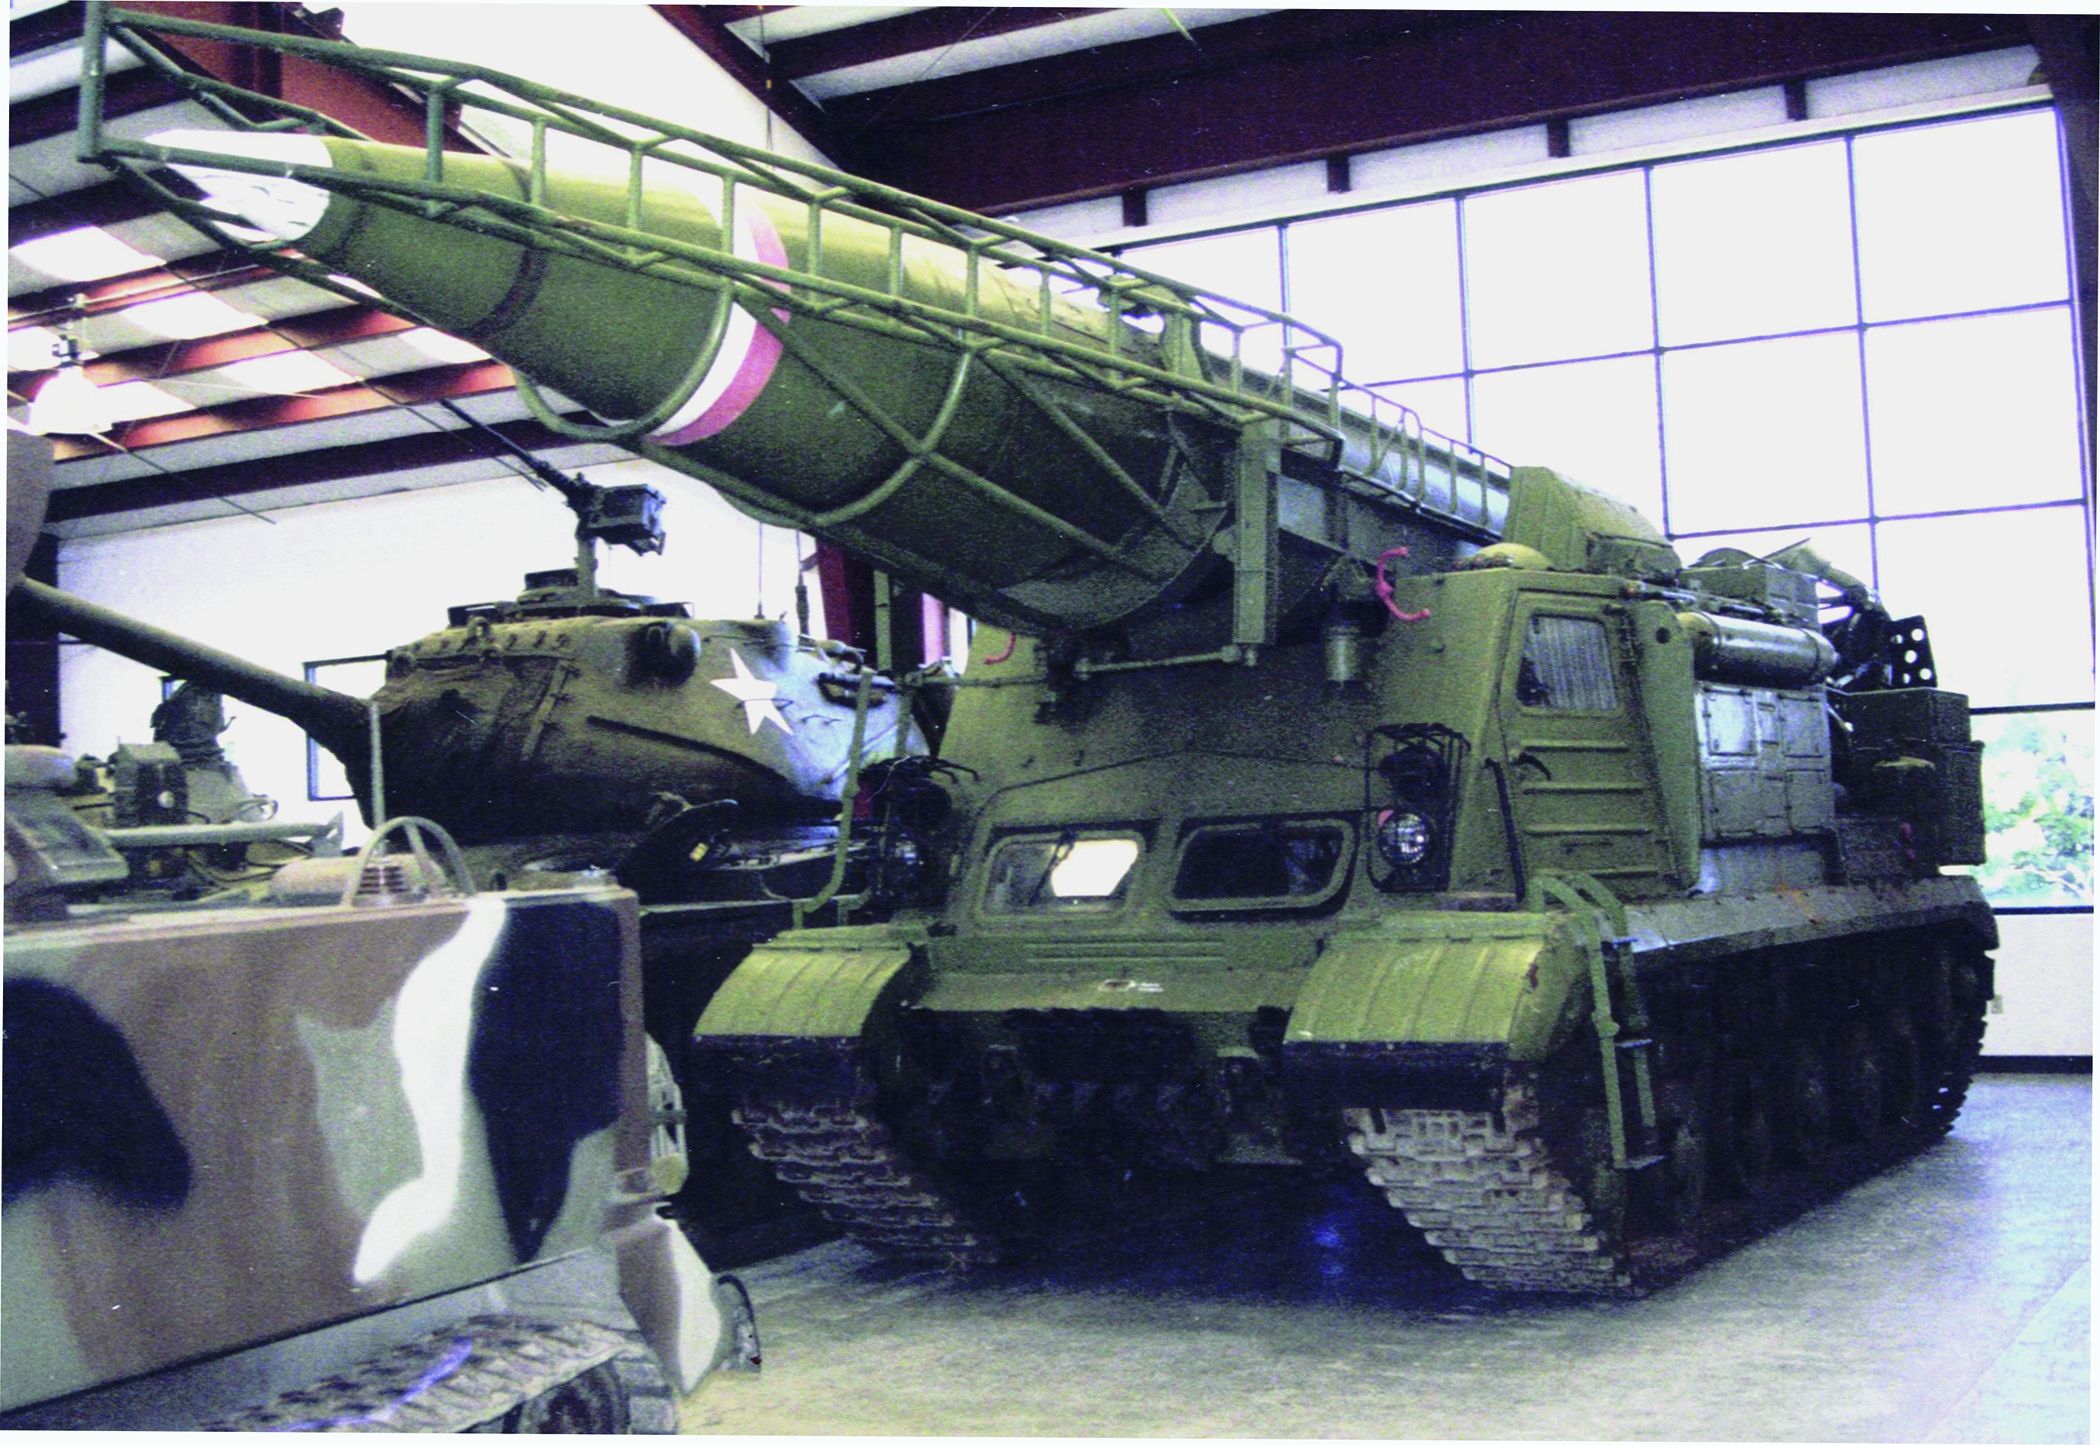 A Scud A missile and carrier, circa 1980.